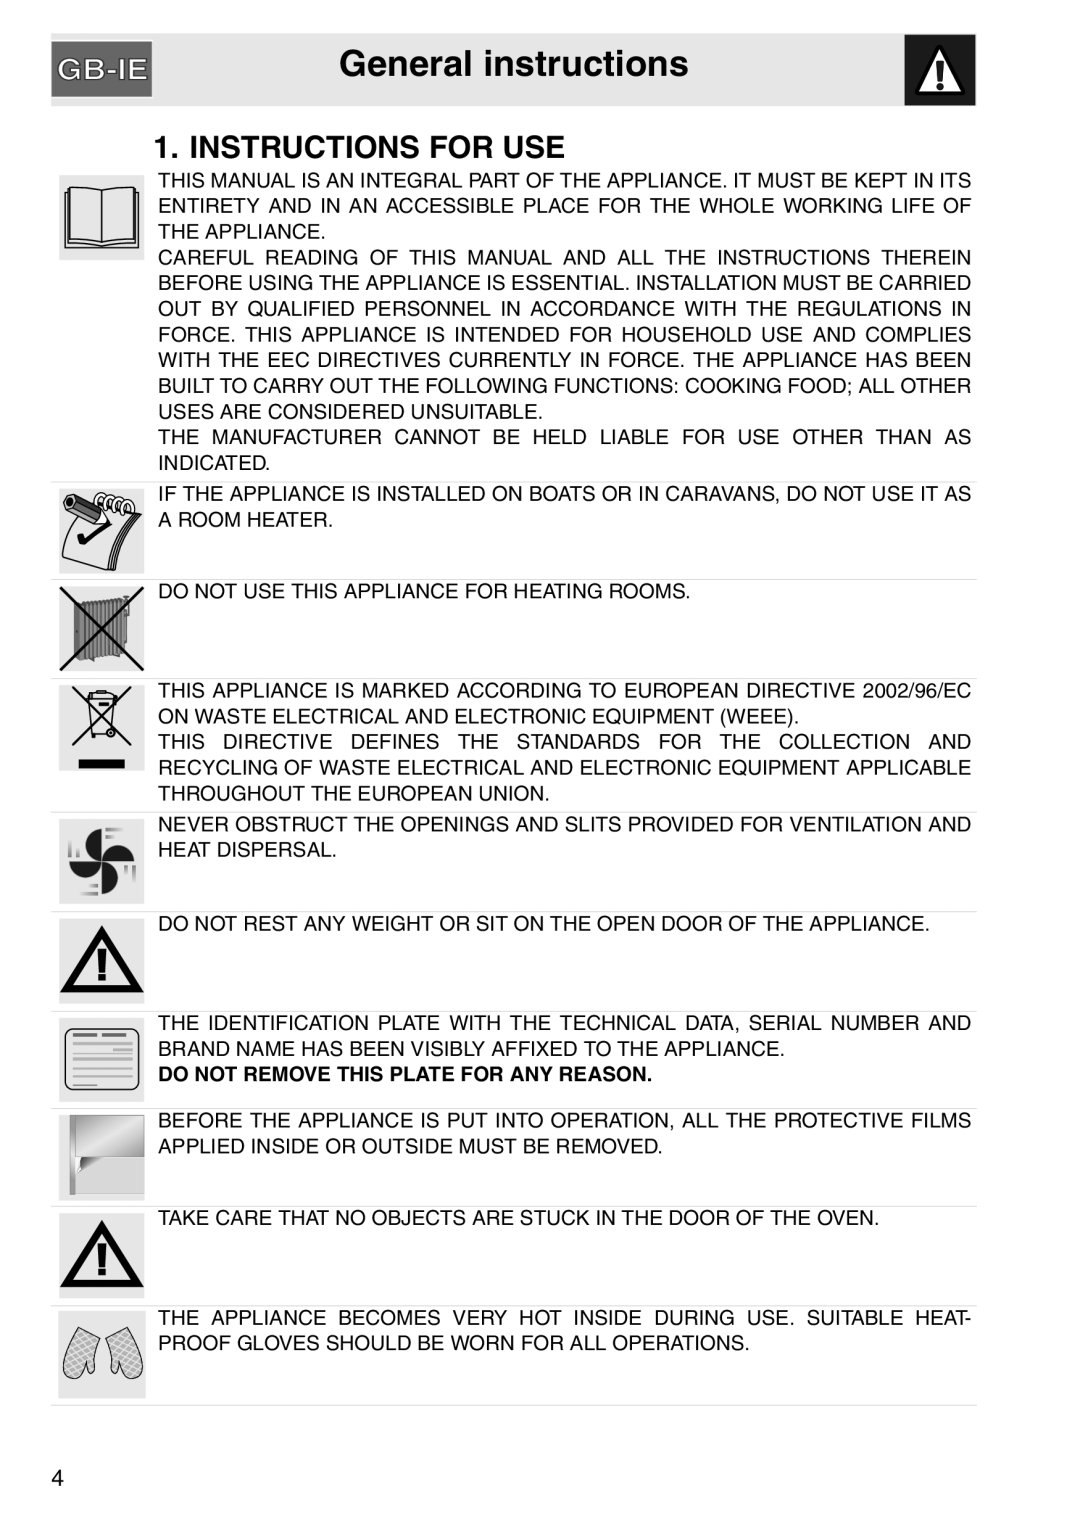 Smeg SA561X-9 installation instructions General instructions, Instructions For Use, Do Not Remove This Plate For Any Reason 